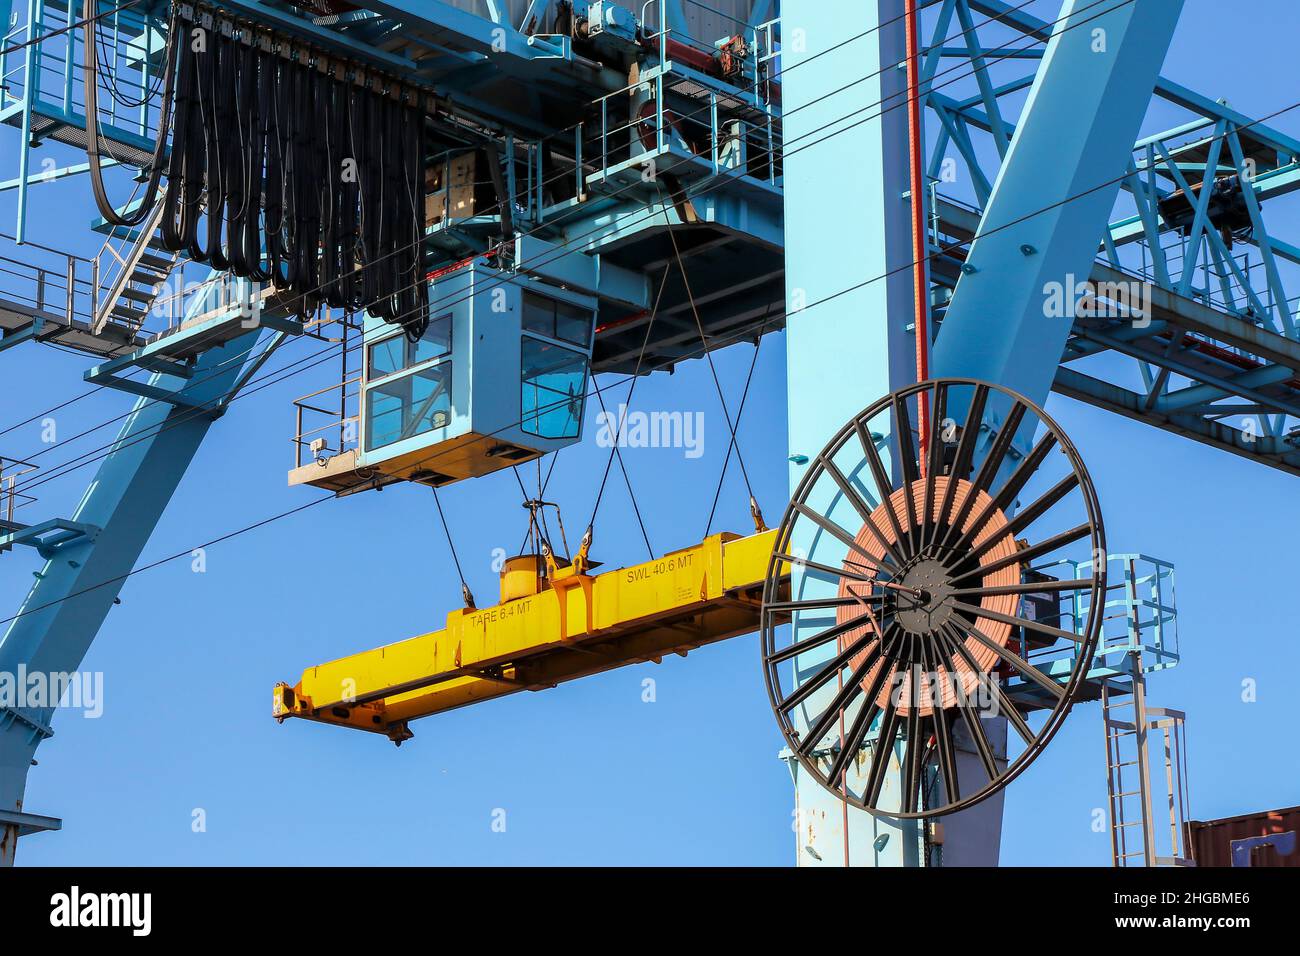 https://c8.alamy.com/comp/2HGBME6/gantry-crane-and-cable-reel-in-docklands-motorized-industrial-equipment-used-to-lift-heavy-shipping-containers-at-port-blue-sky-dublin-ireland-2HGBME6.jpg